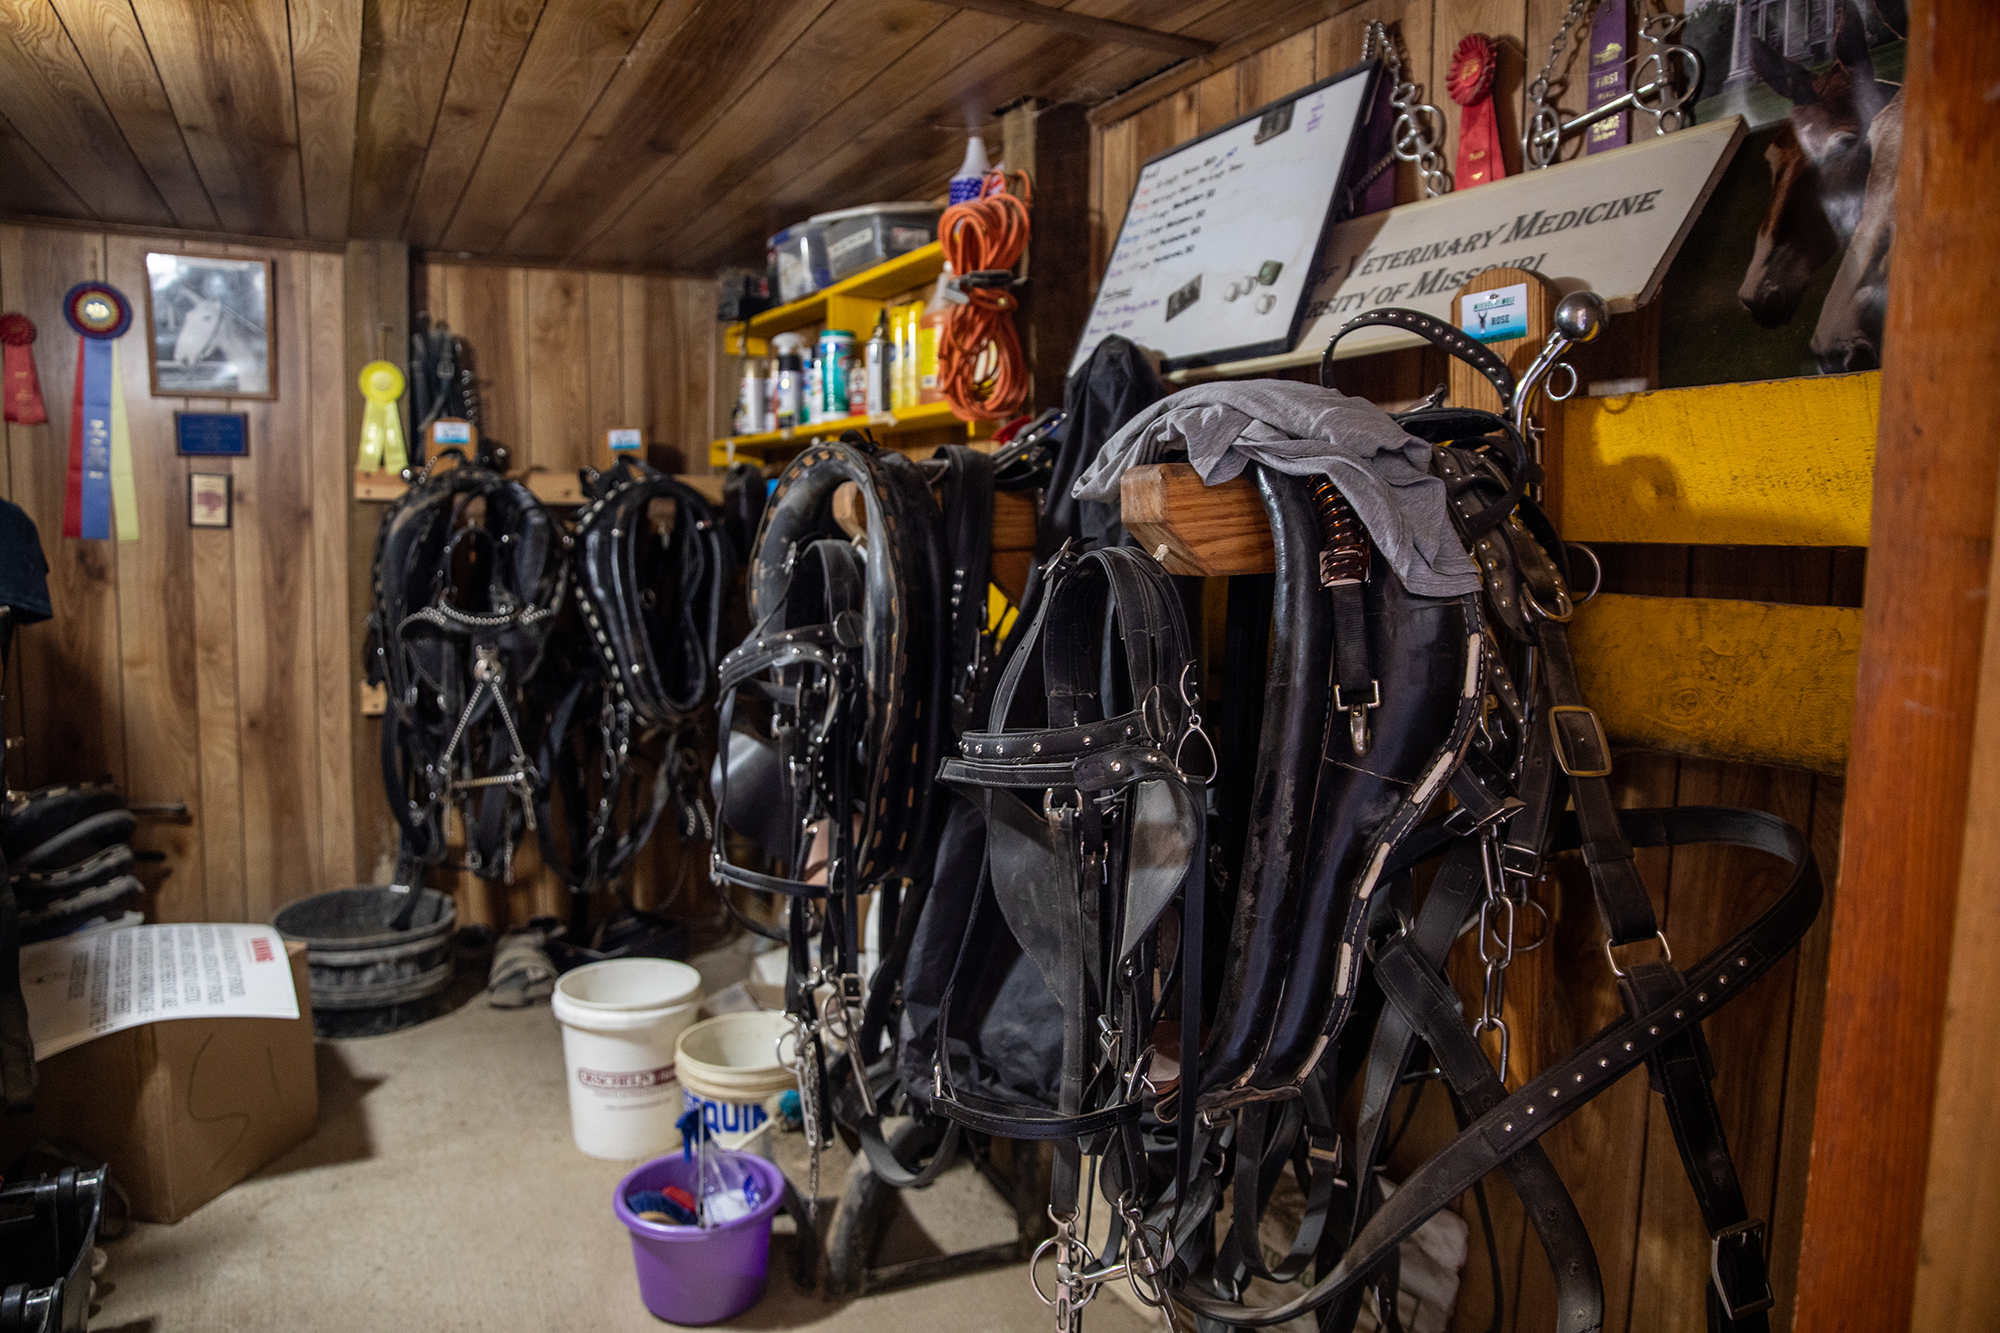 sets of gear for the mules to pull carts with hang on the wall